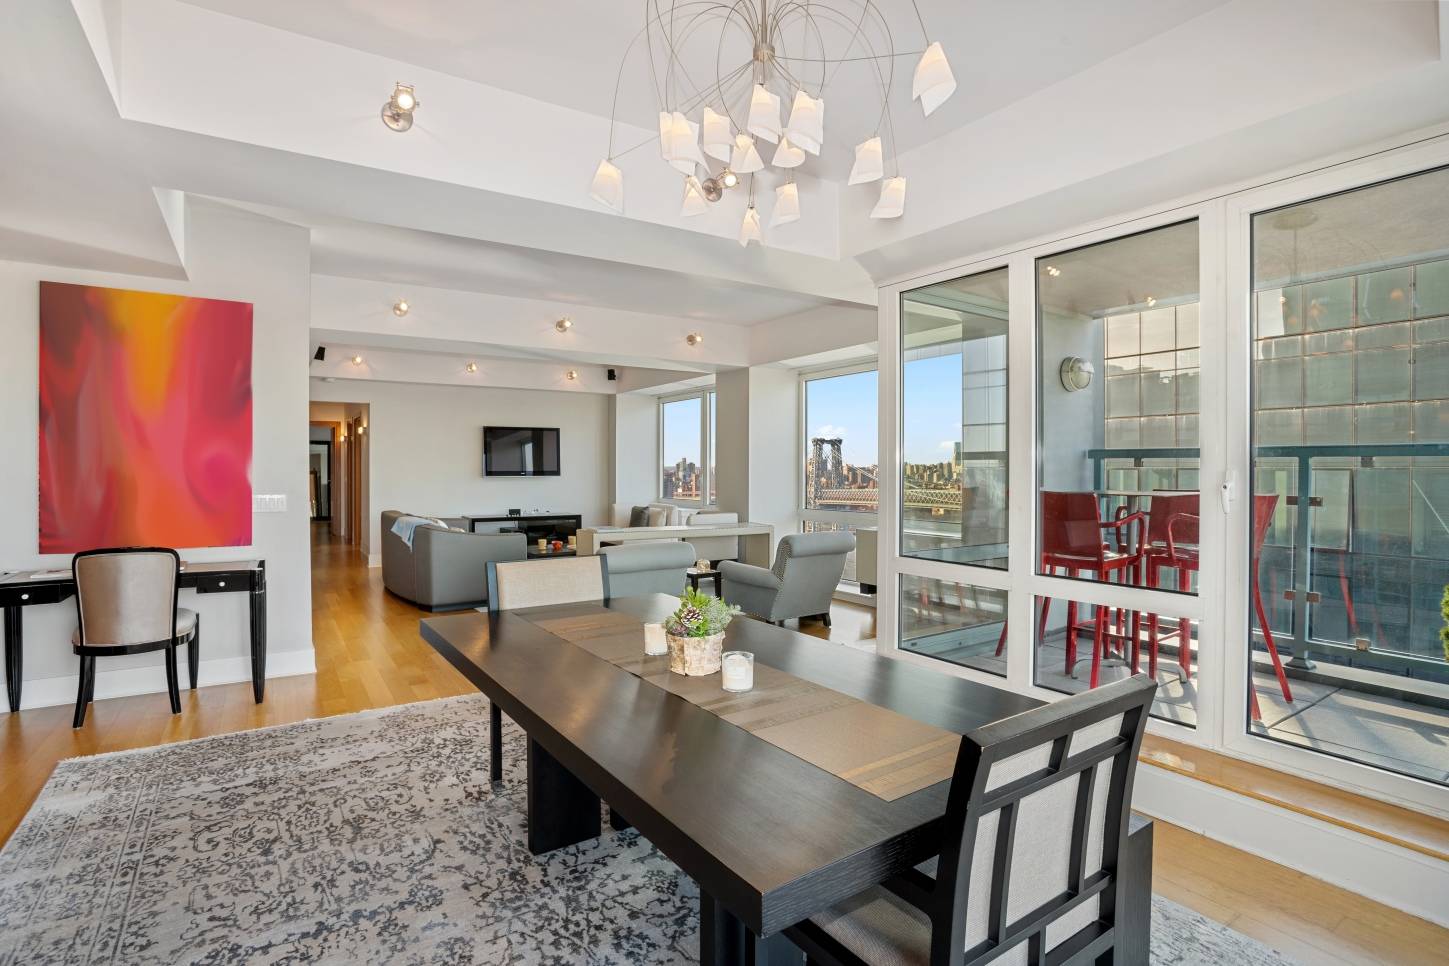 Welcome to this incredible Penthouse at the coveted Schaefer Landing North Condominium located on the East River waterfront.